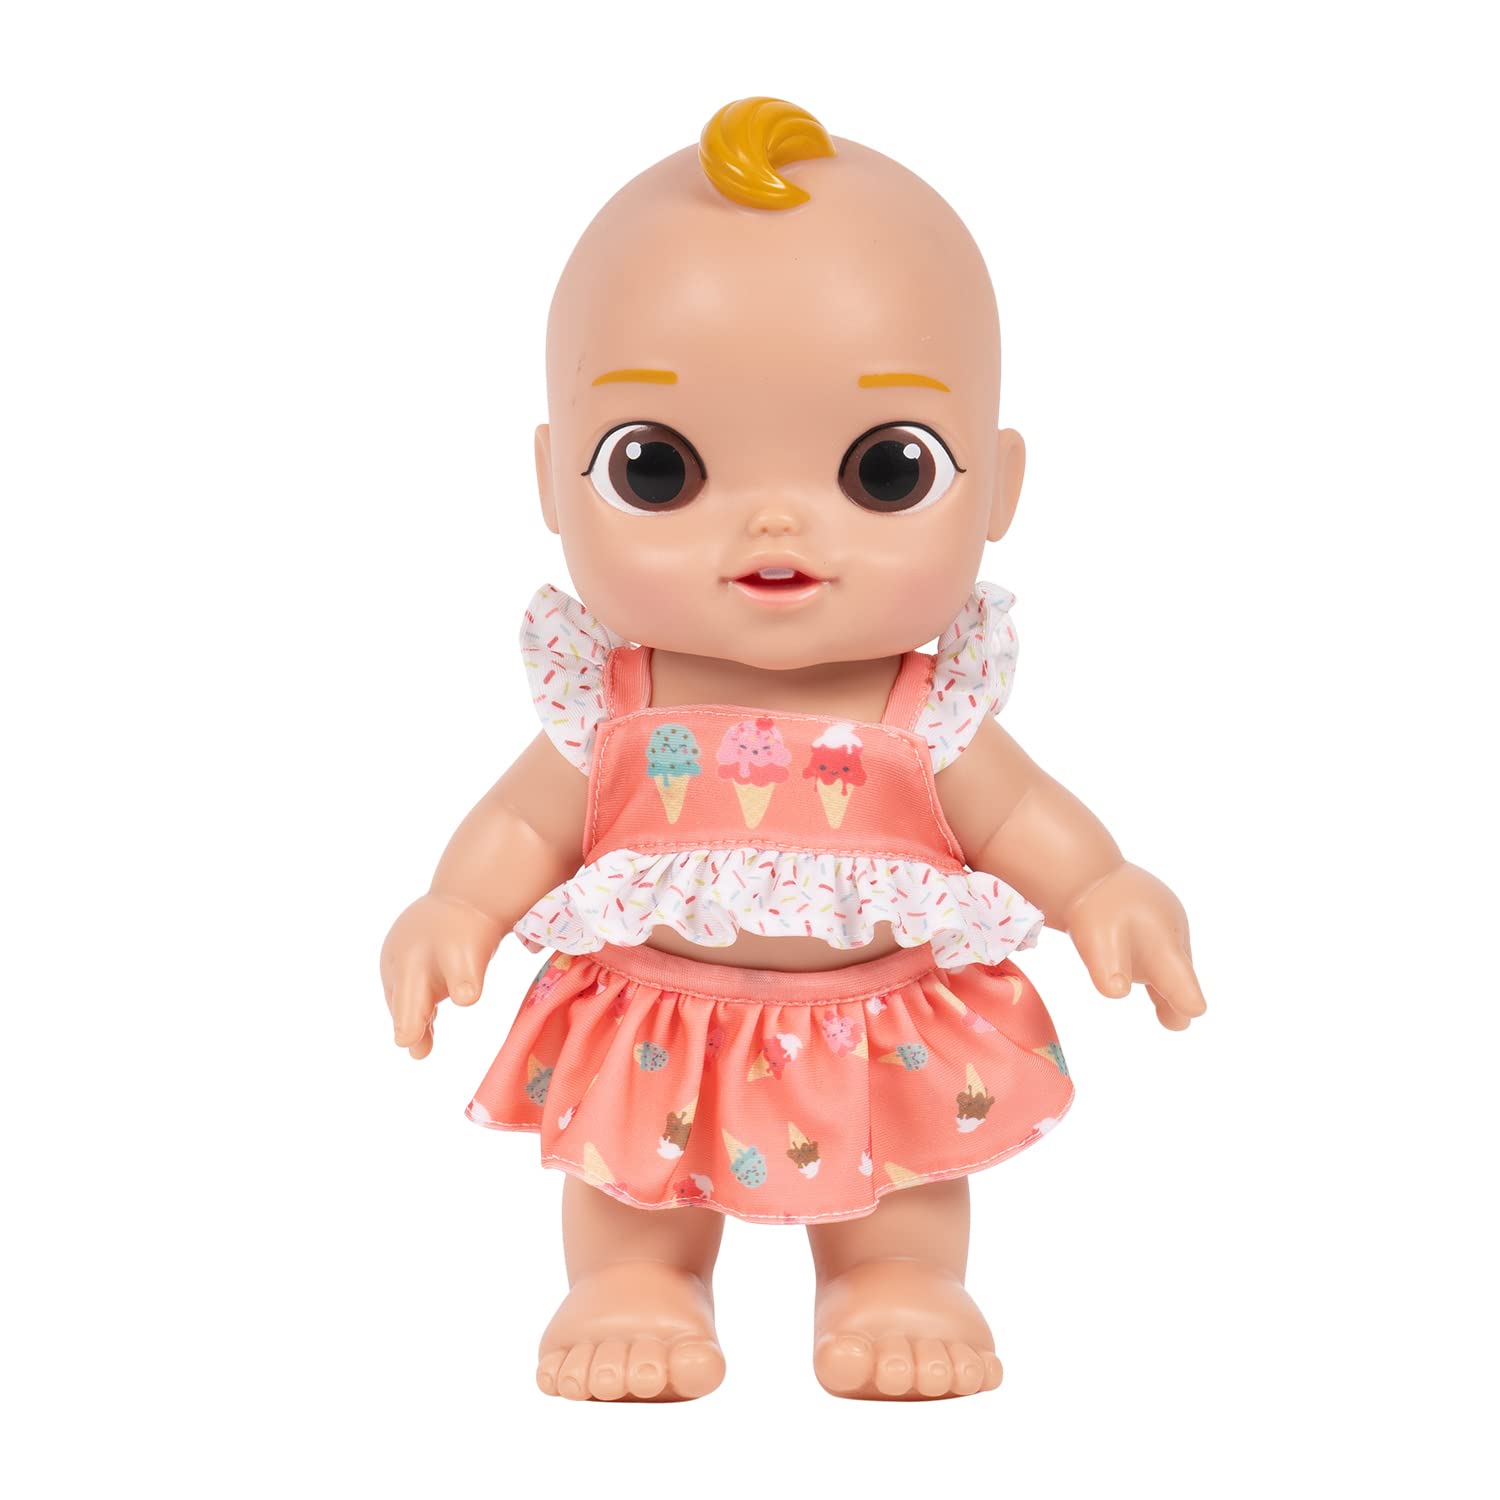 10'' ADORA Sun Smart Baby Doll Sprinkles w/ UV-Activated Skin & Accessories $13.01 + Free Shipping w/ Prime or on $35+